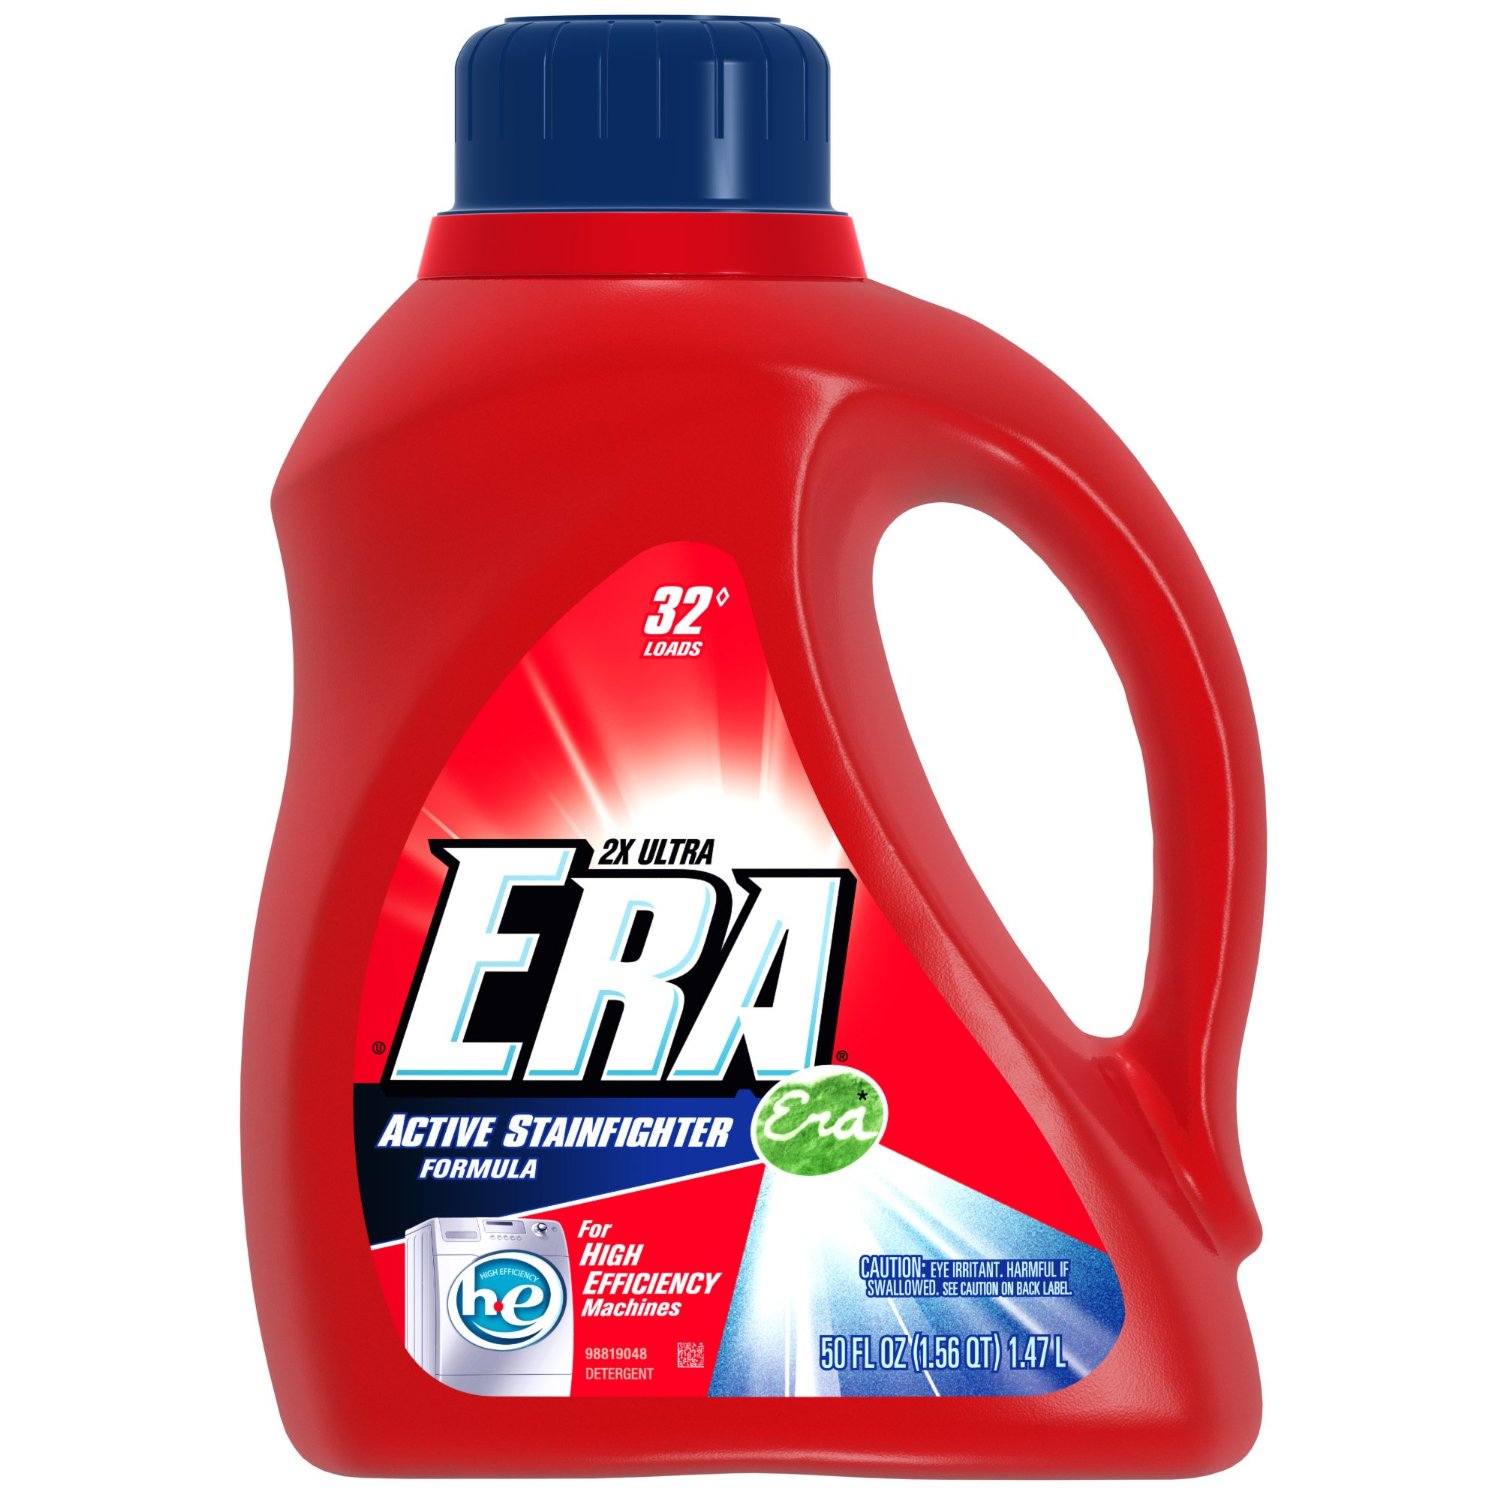 meijer-era-laundry-detergent-only-1-49-11-6-and-11-7-only-become-a-coupon-queen